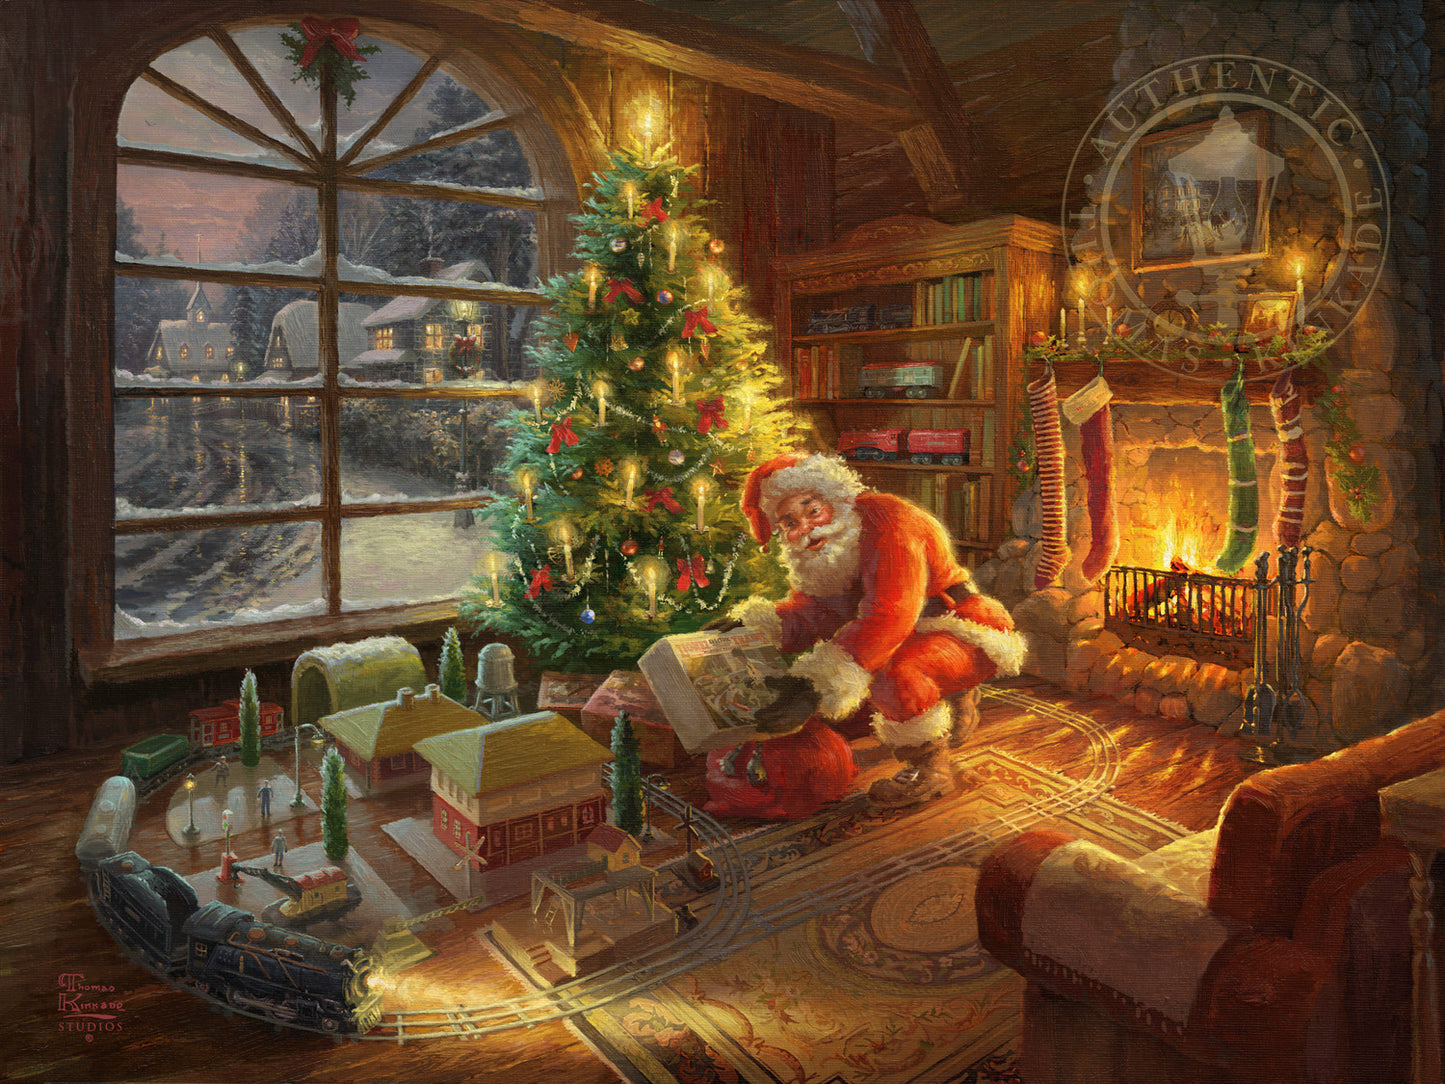 Thomas Kinkade Studios "Santa's Special Delivery" Limited and Open Canvas Giclee